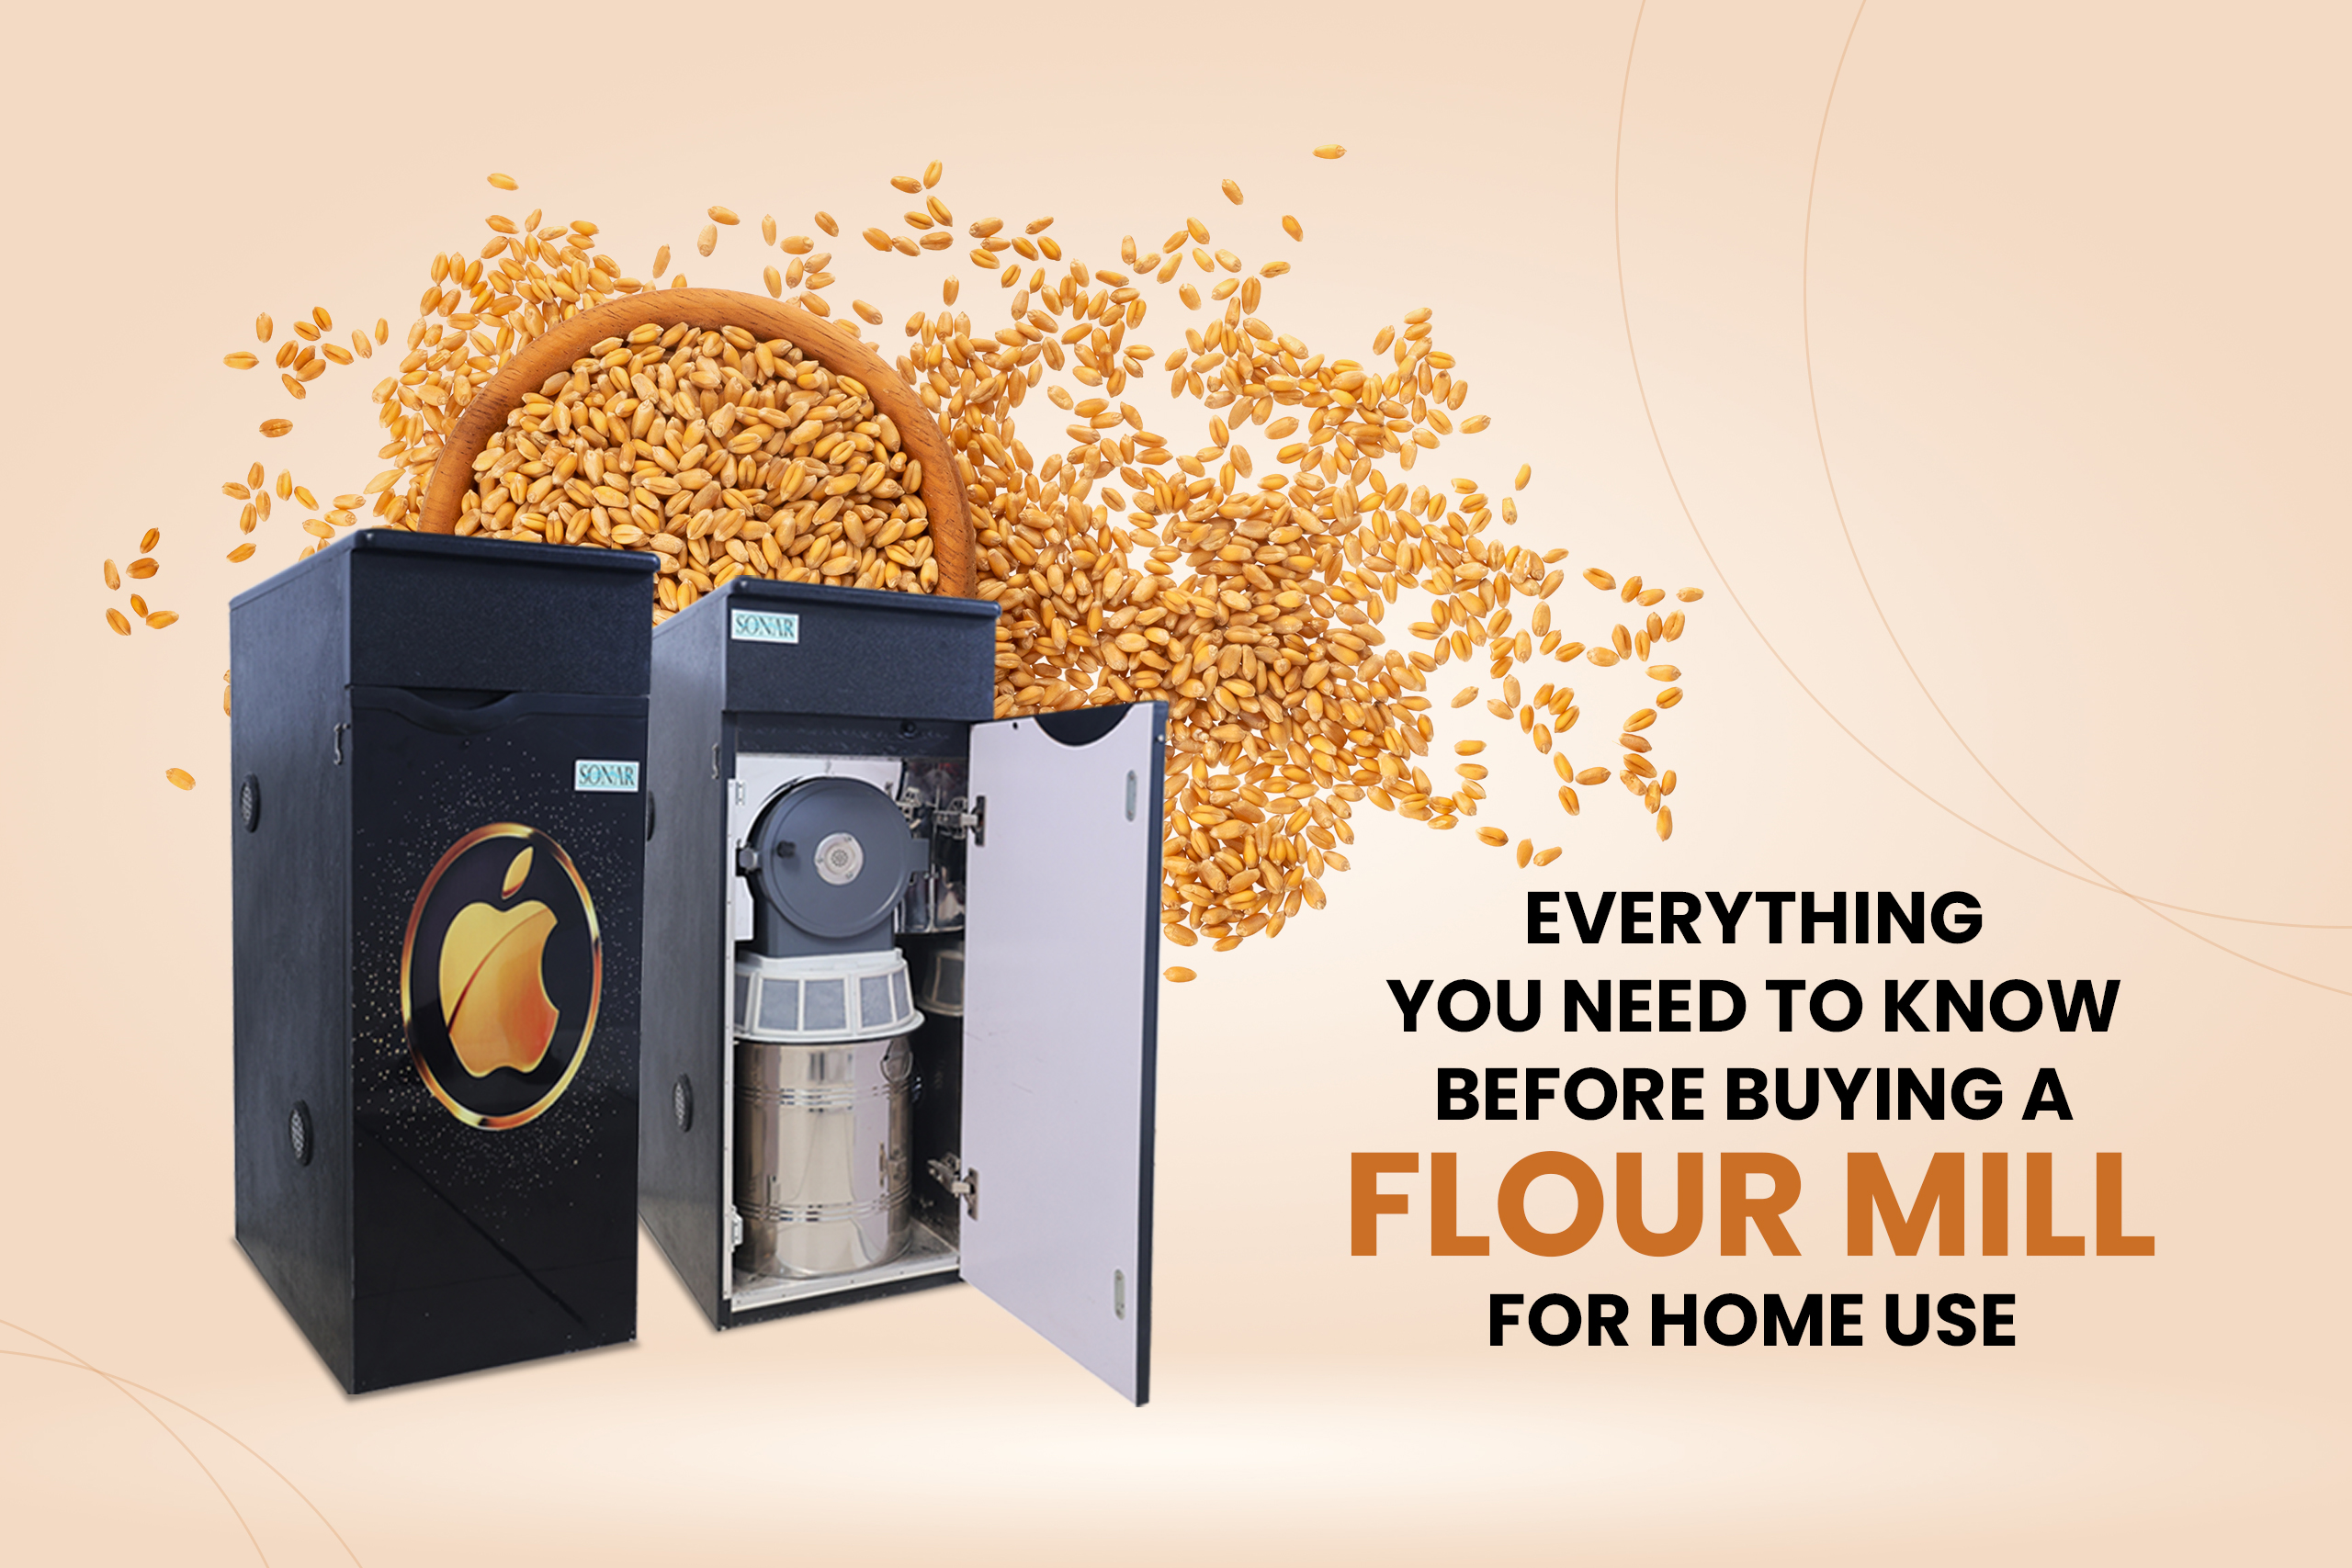 Everything You Need to Know Before Buying a Flour Mill for Home Use